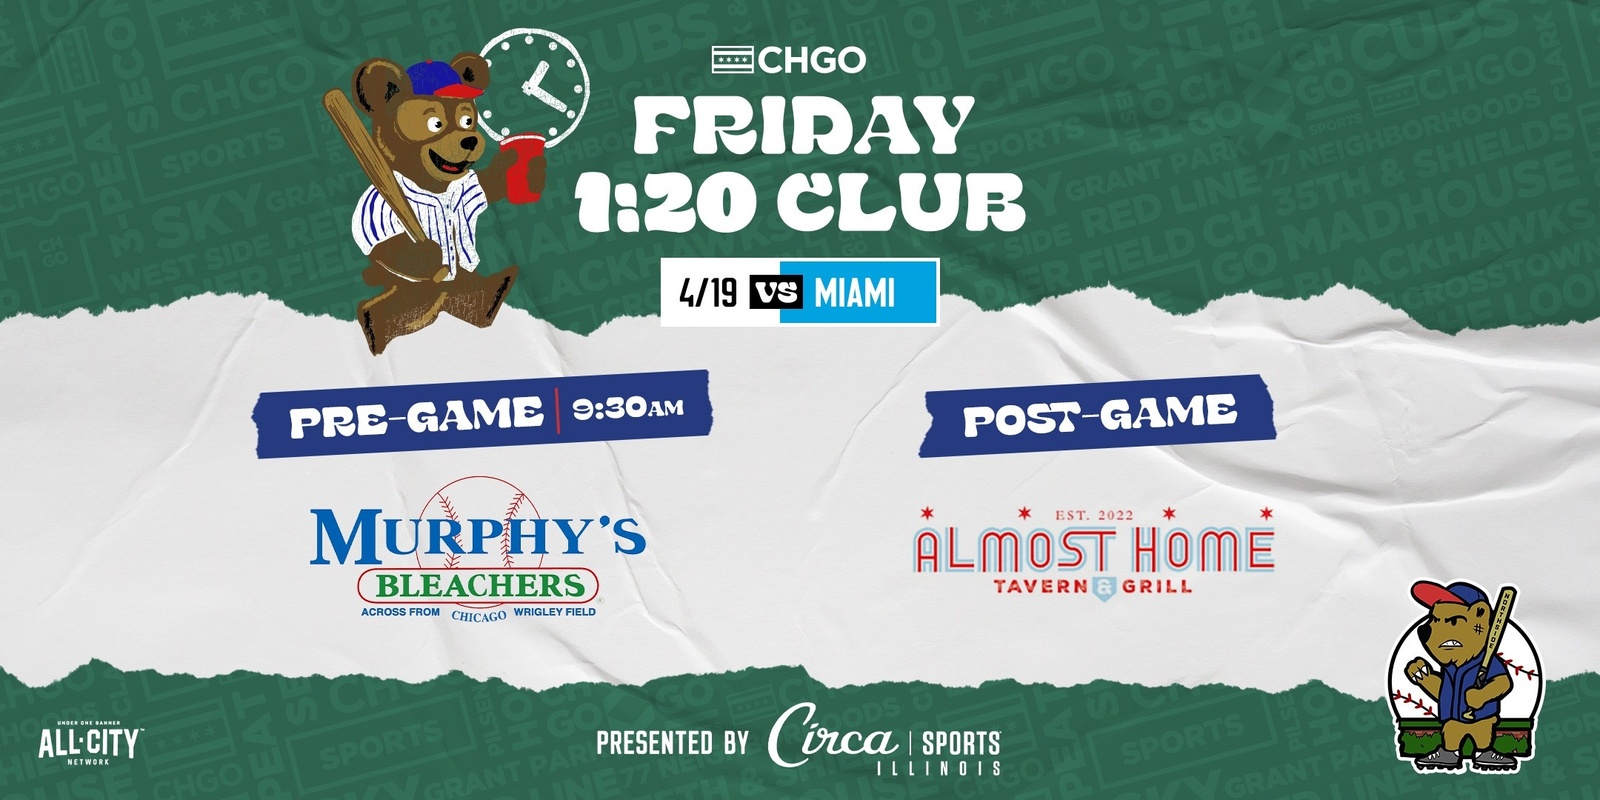 Banner image for CHGO Cubs Friday 1:20 Club Pregame at Murphy's Bleachers and After Party at Almost Home